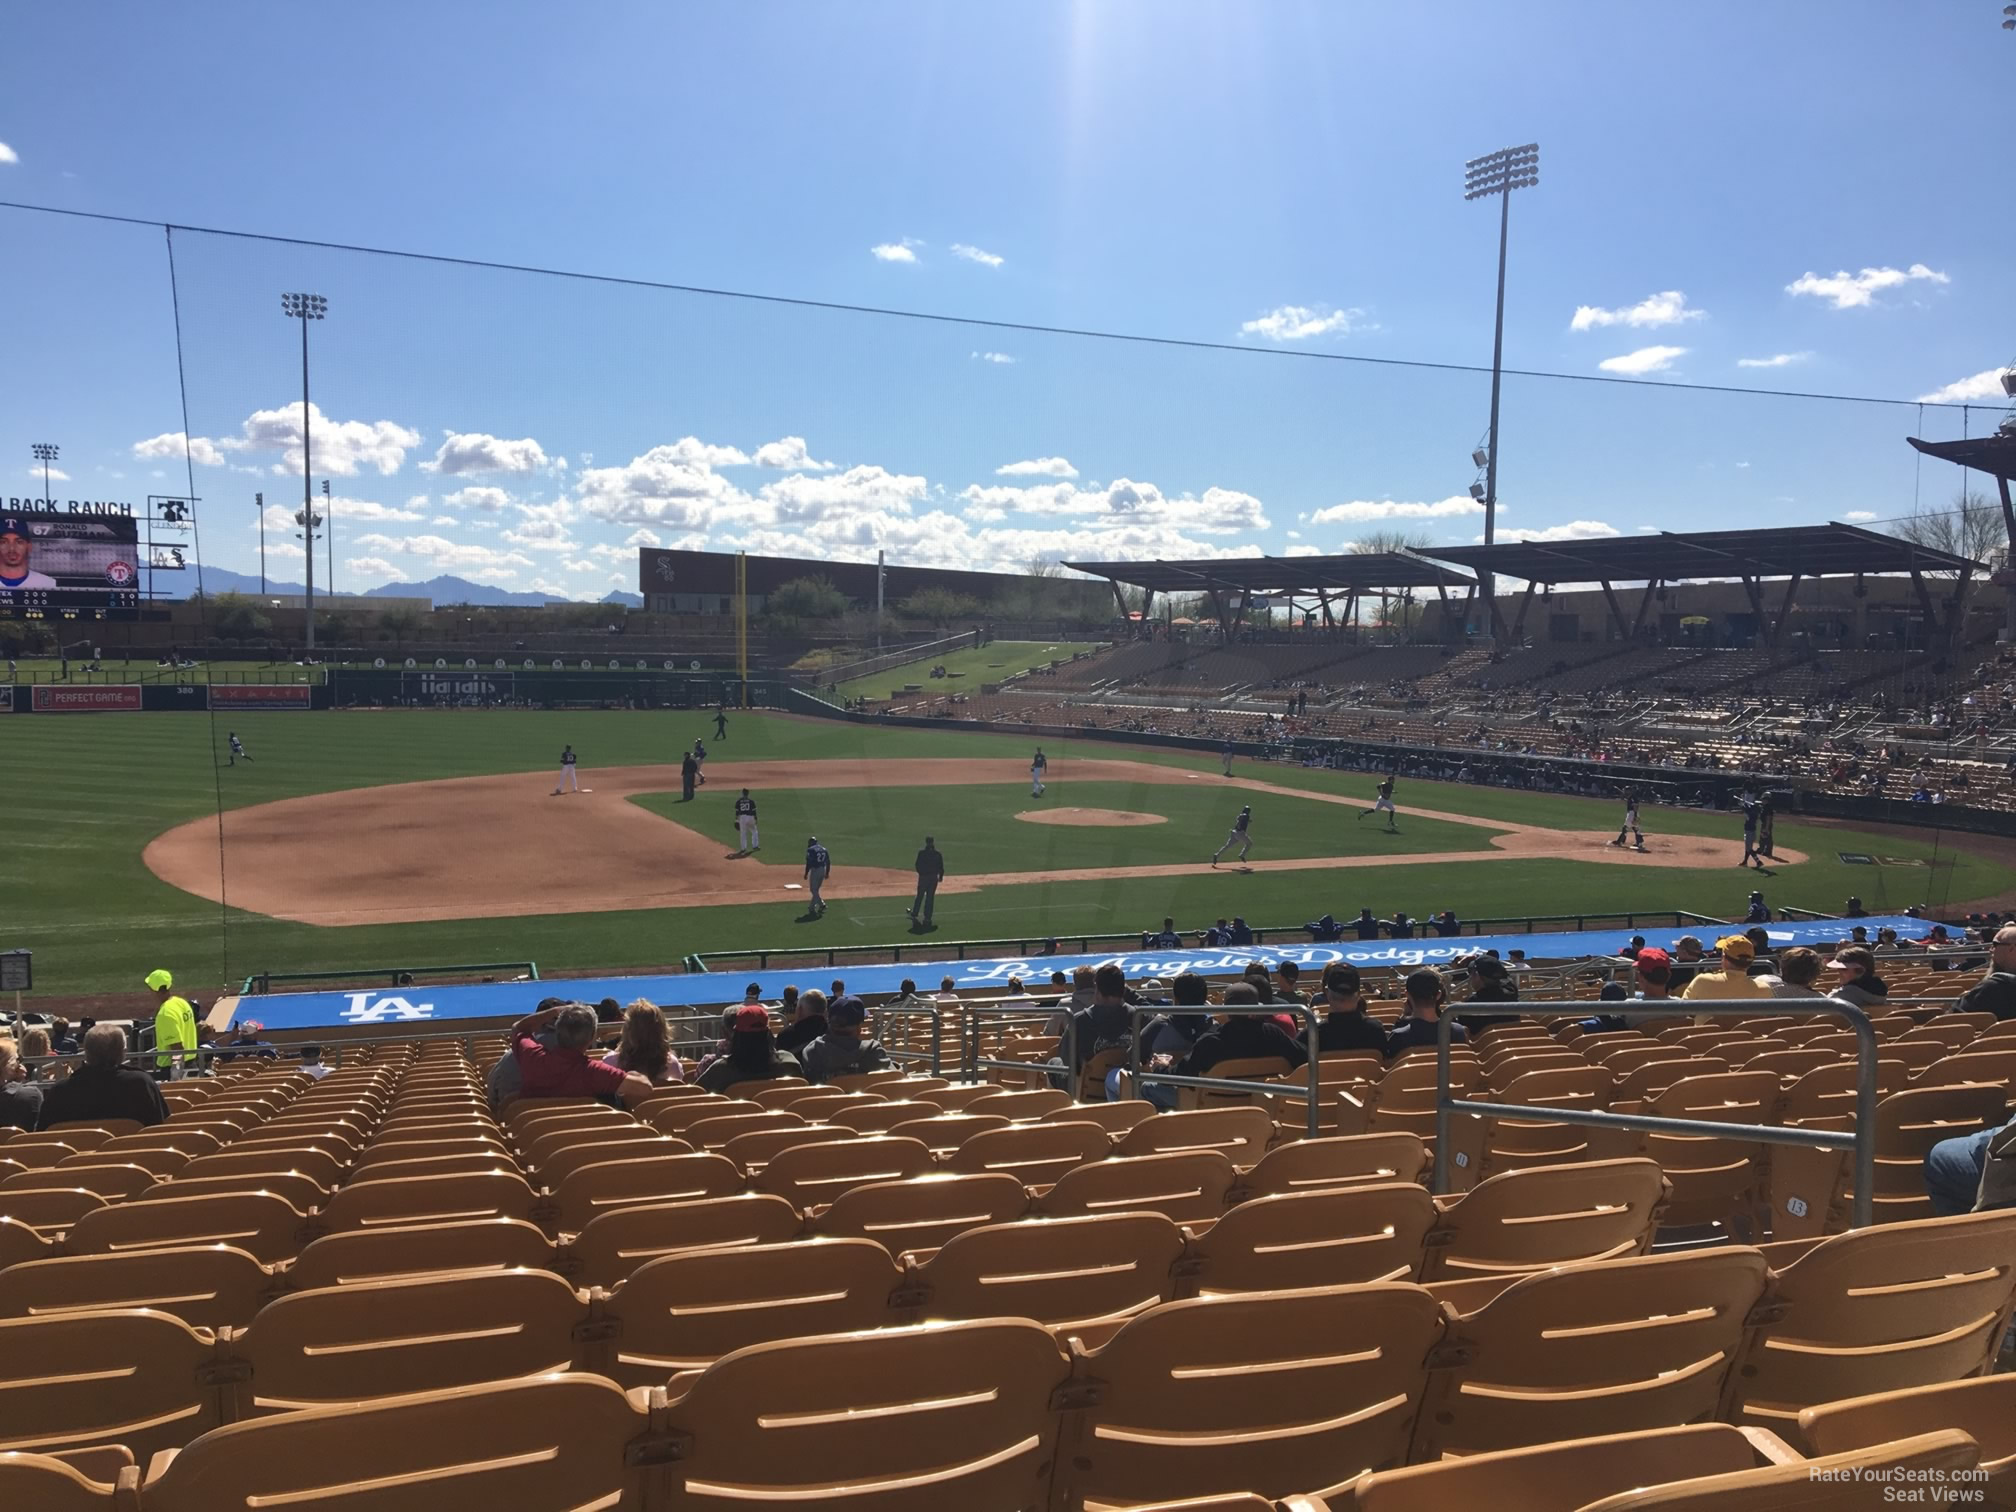 section 124, row 18 seat view  - camelback ranch